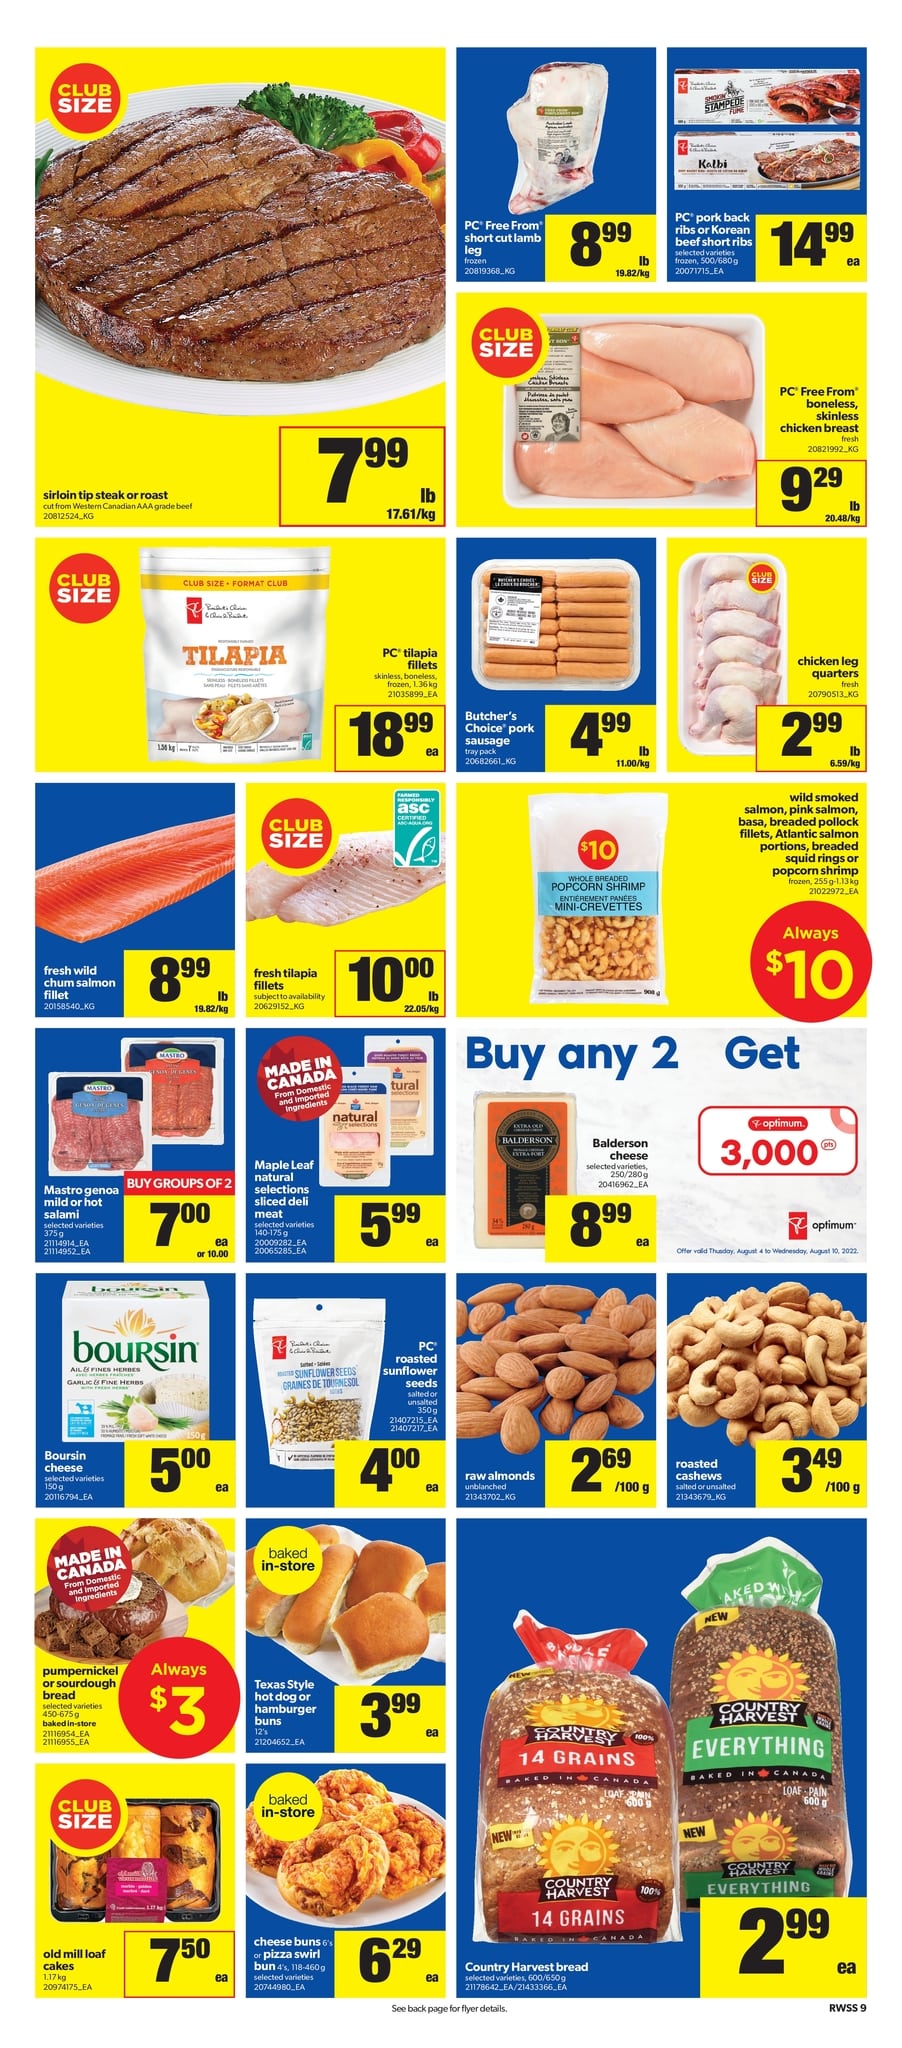 Real Canadian Superstore Western Canada - Weekly Flyer Specials - Page 10